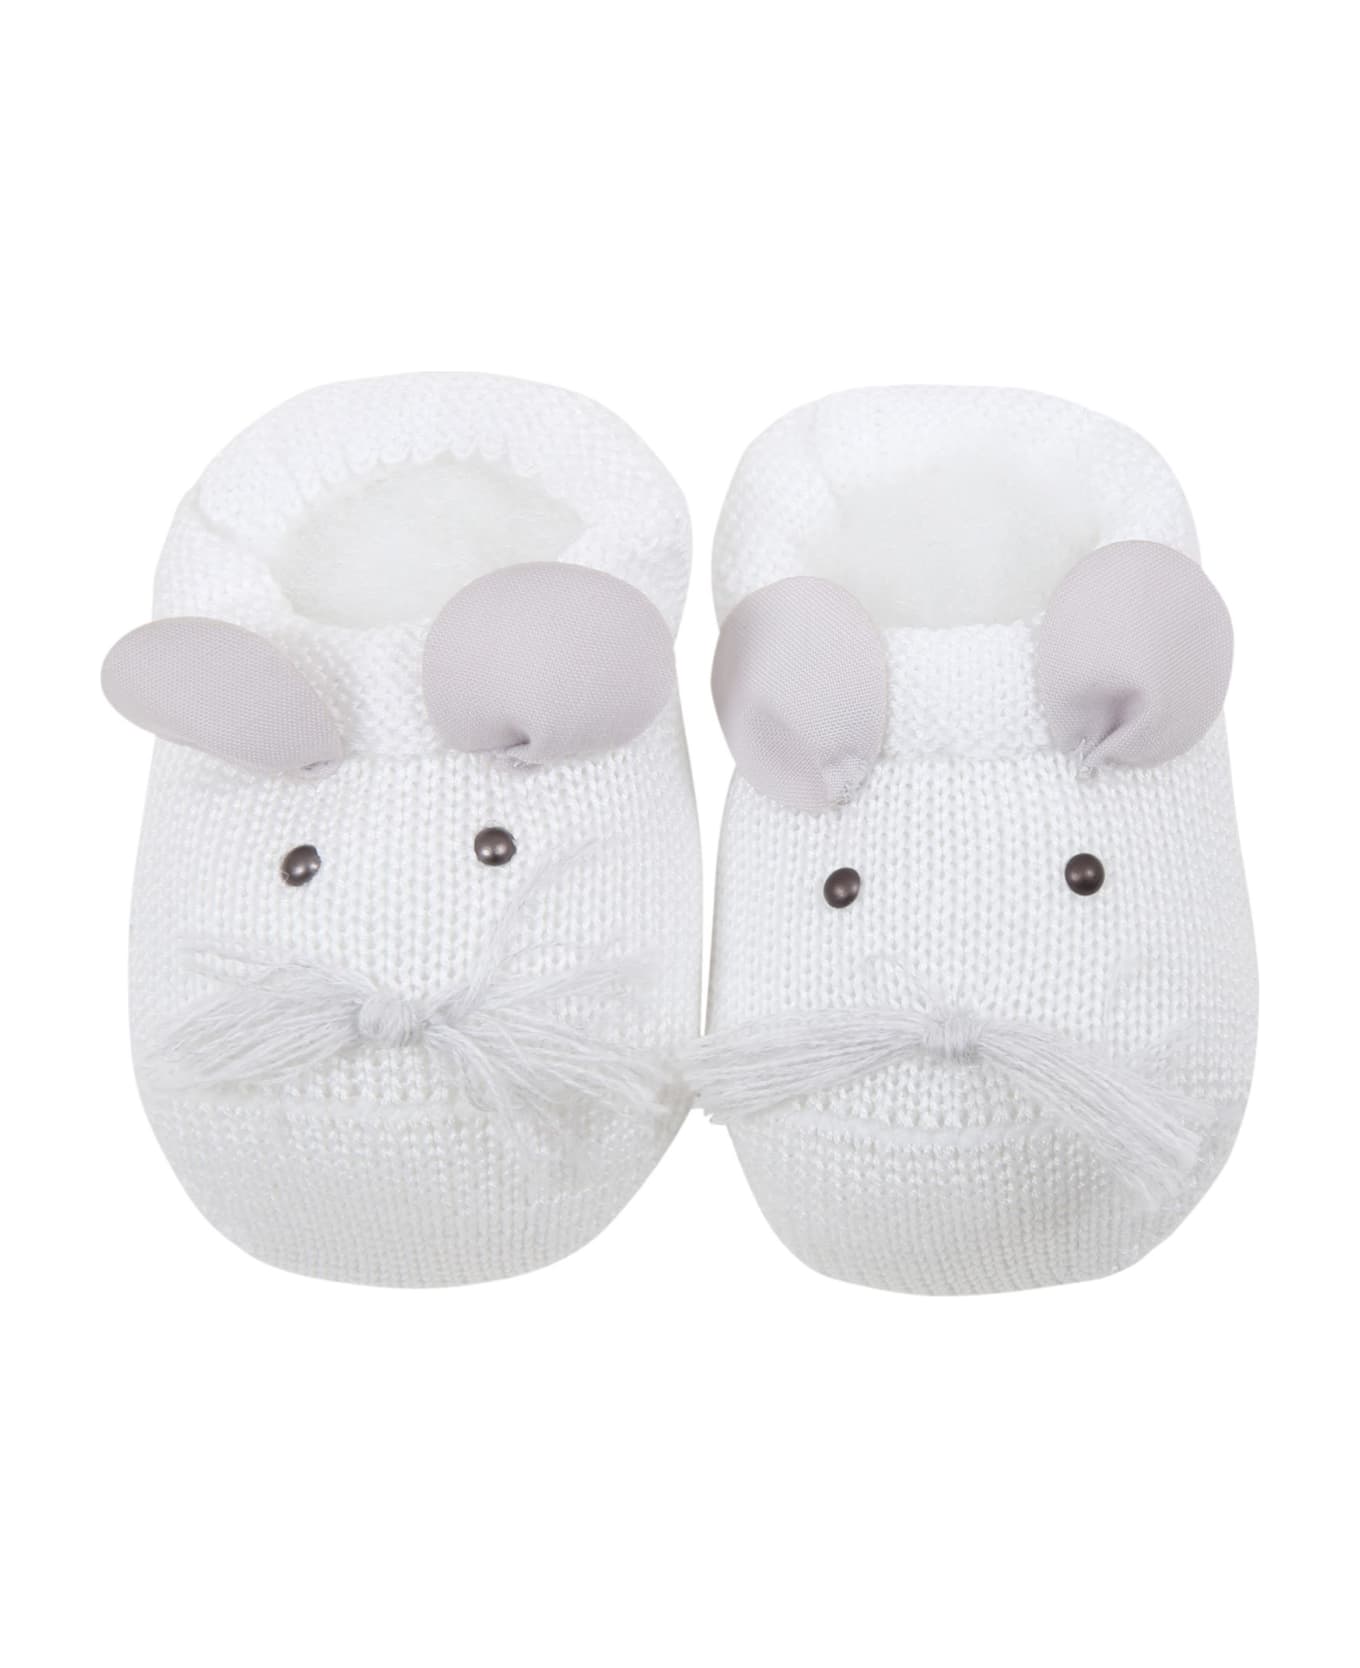 Story Loris White Slippers For Baby Boy - White